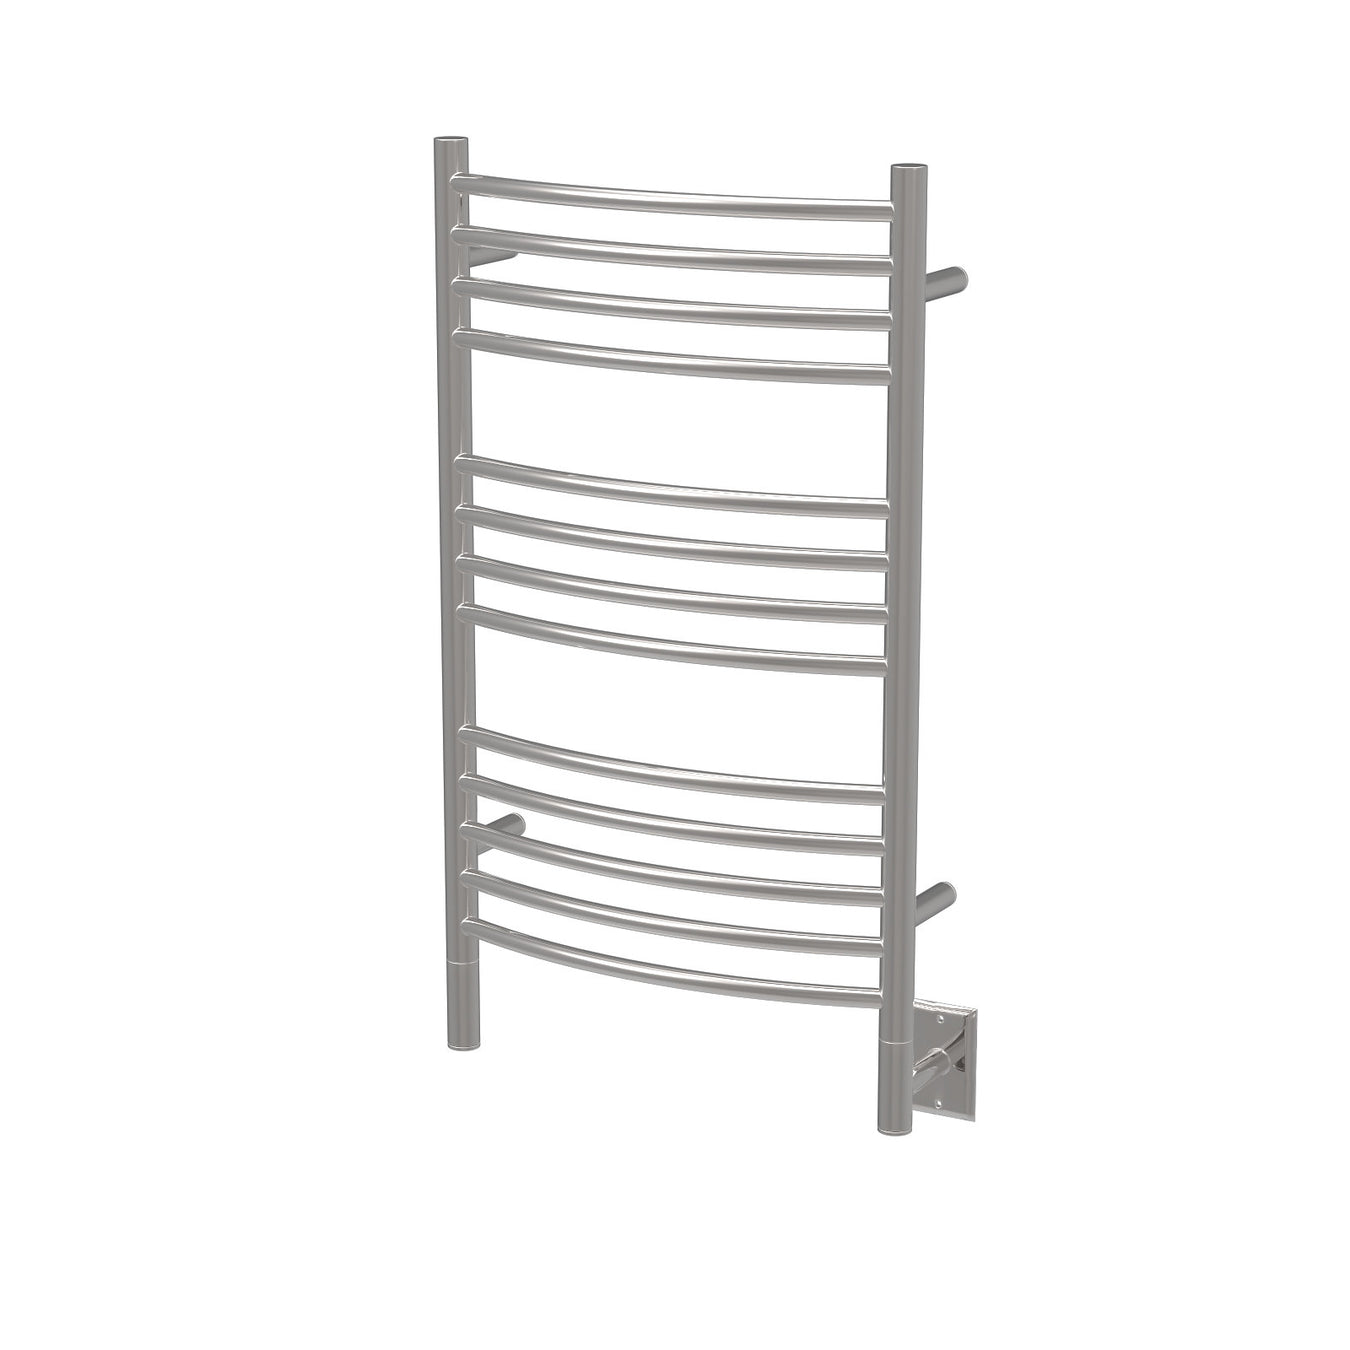 Amba Products Jeeves Collection Model C Curved Towel Warmers